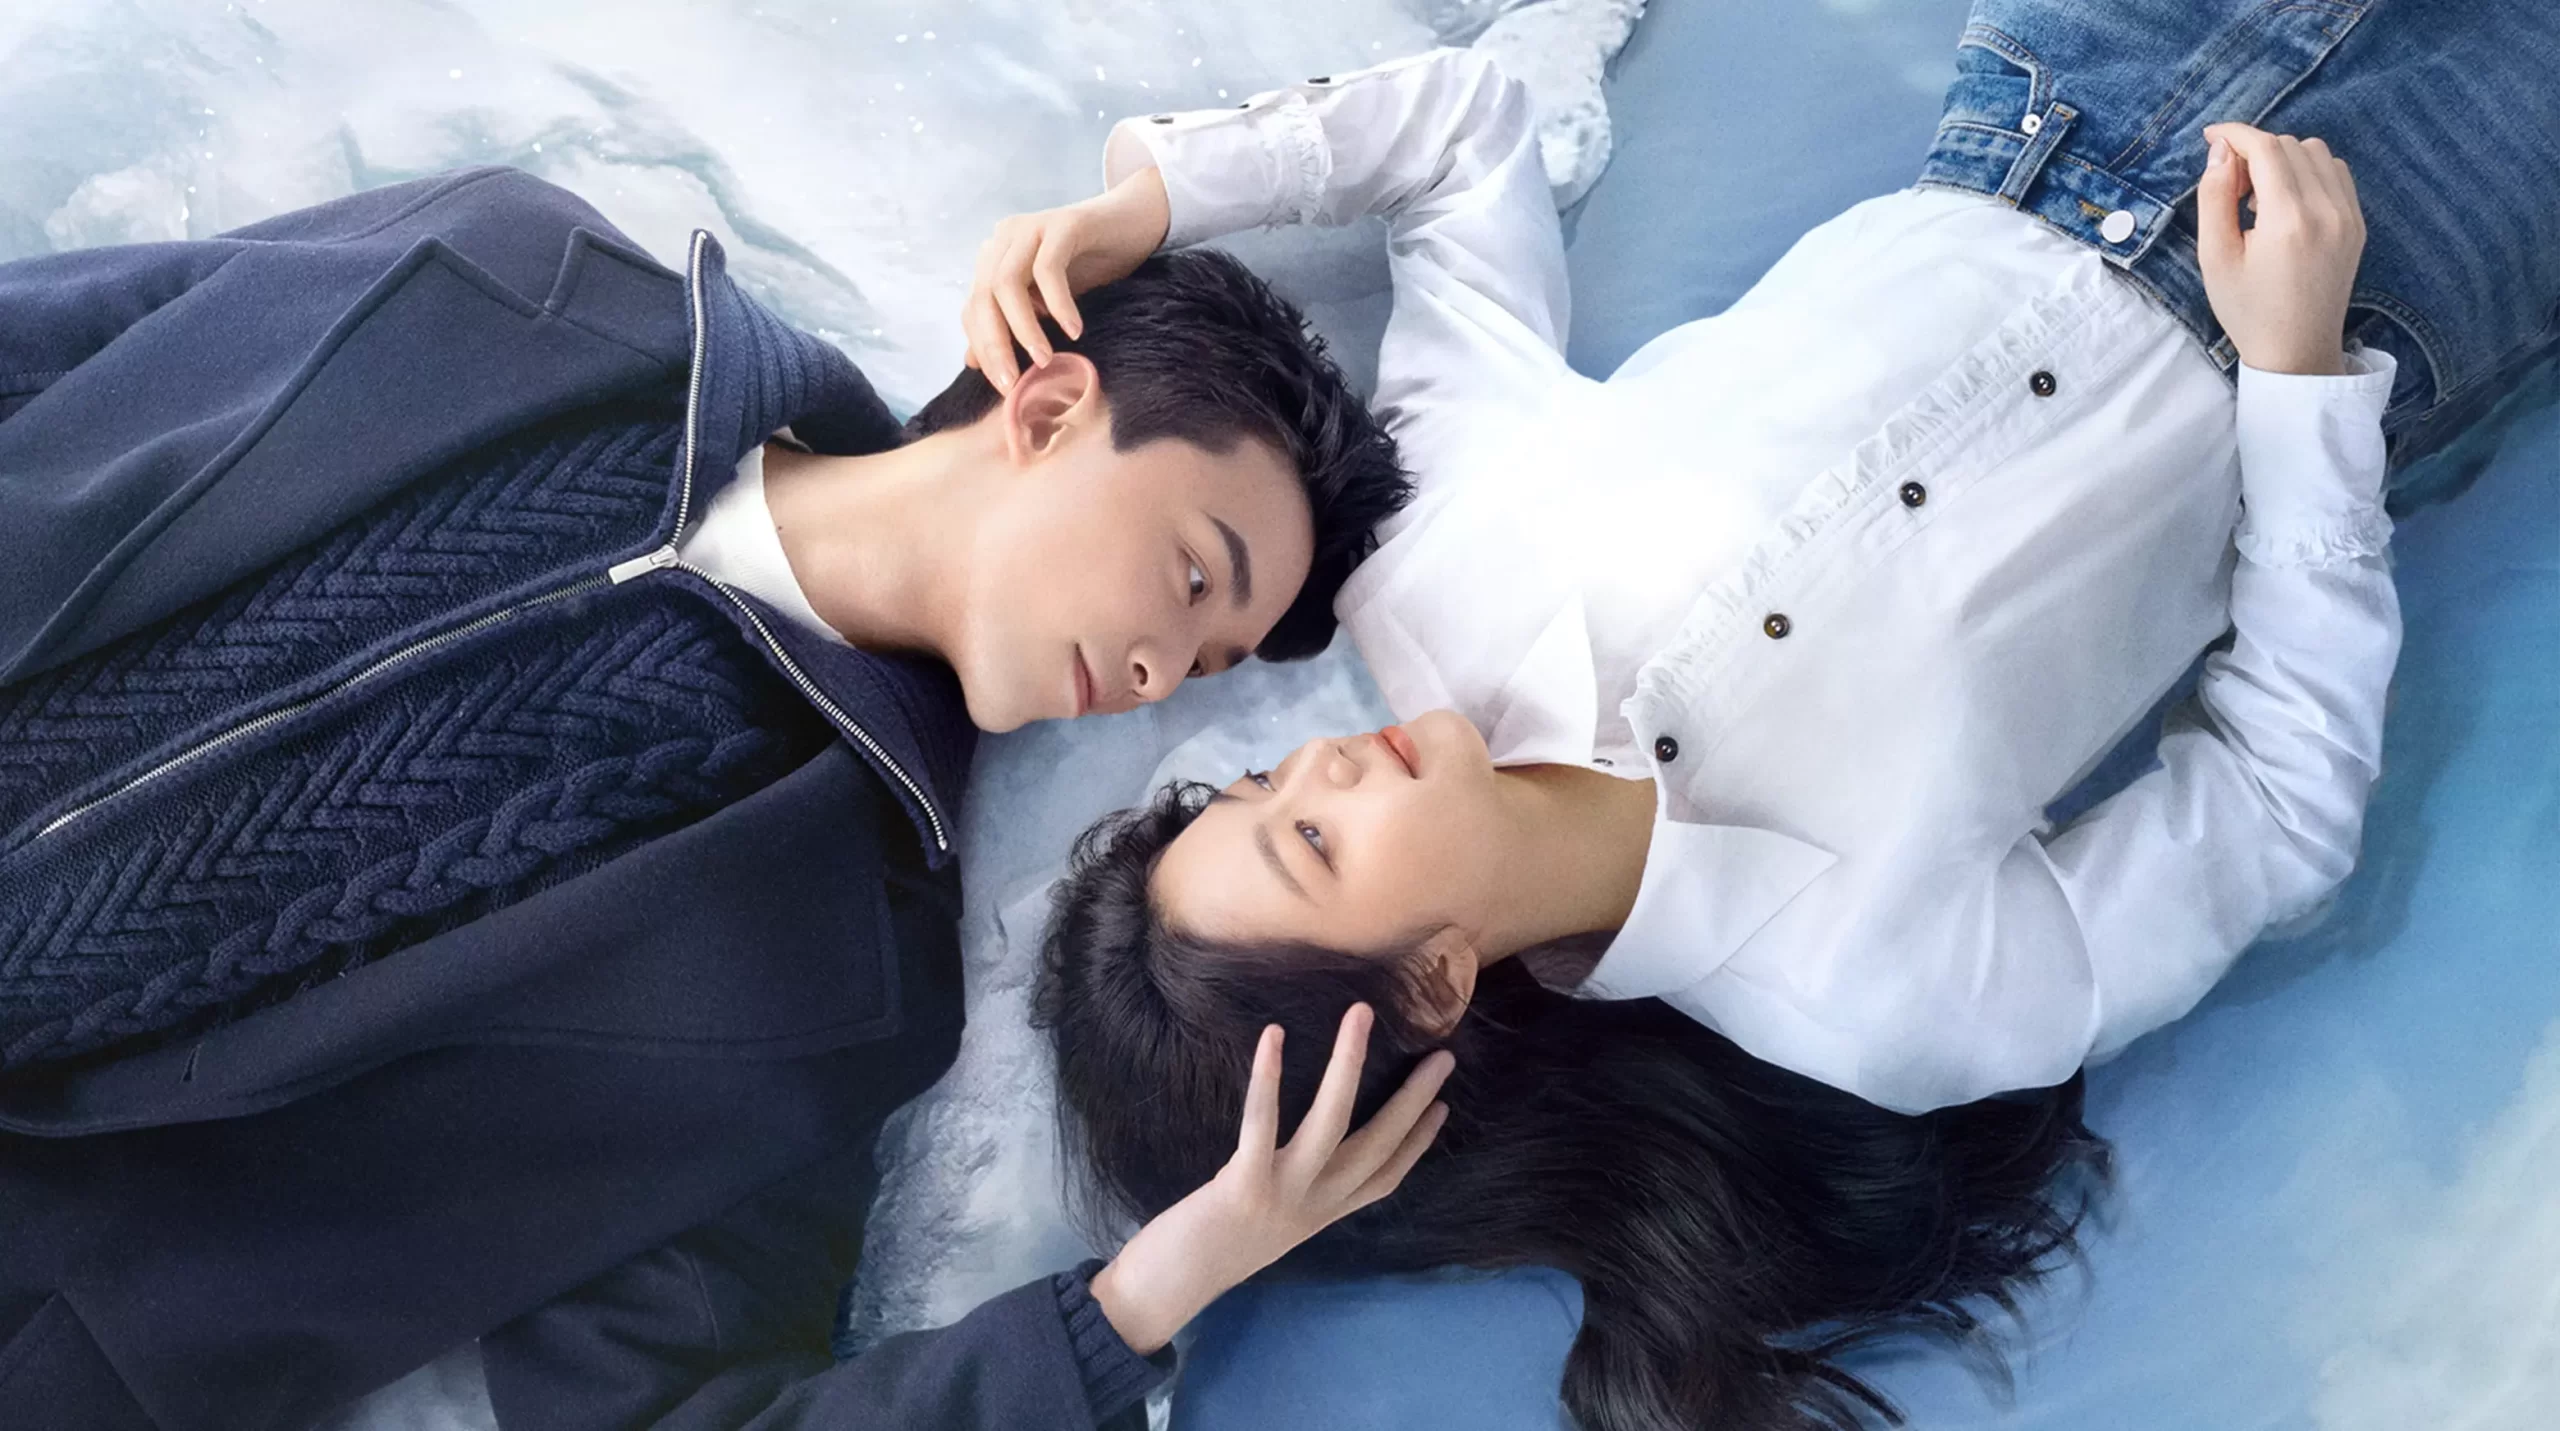 <p class="continue-read-break"><em>Synopsis:</em> Witness the romance between a billiards prodigy and an elite player as they inspire each other to pursue their dreams and reignite their passions.</p> <p><em>Starring:</em> Leo Wu, Zhao Jinmai, Wang Xingyue</p>